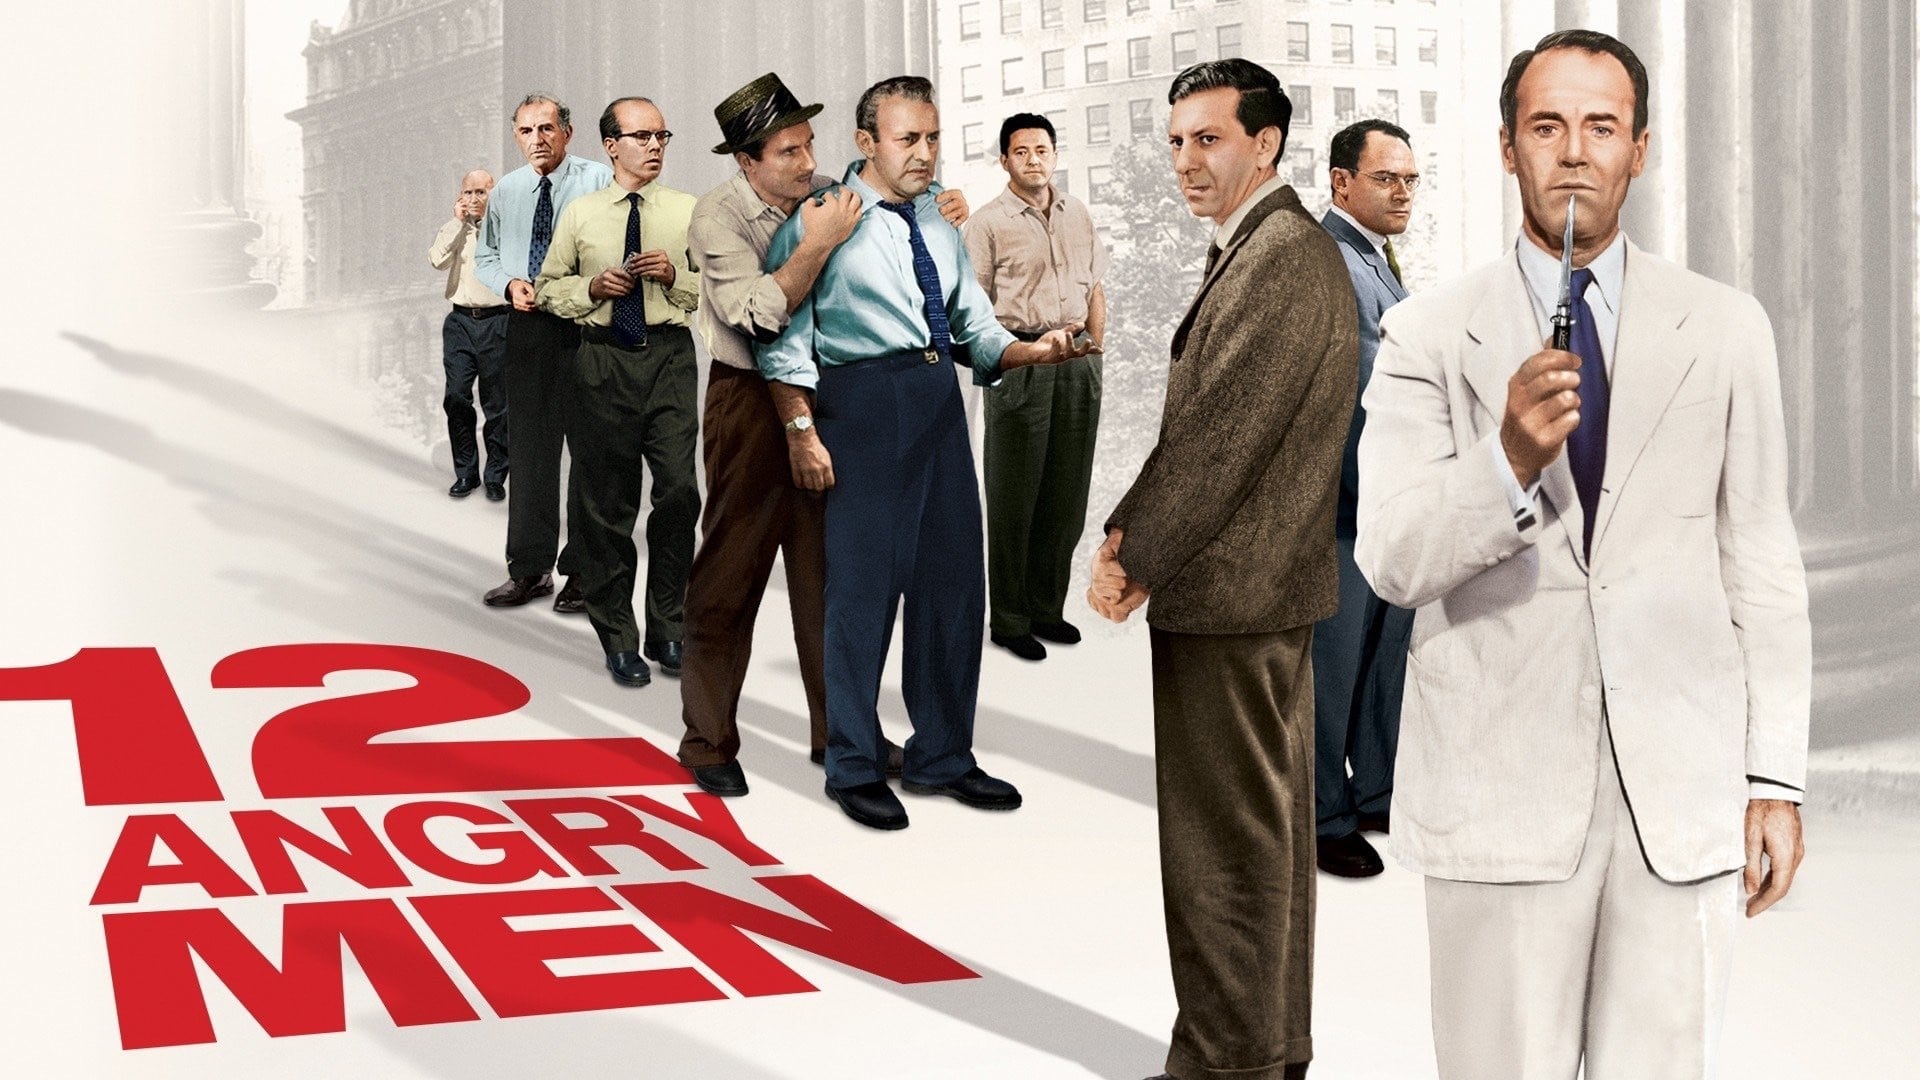 Watch 12 Angry Men (1957) Full Movie Online Free | Stream Free Movies & TV Shows